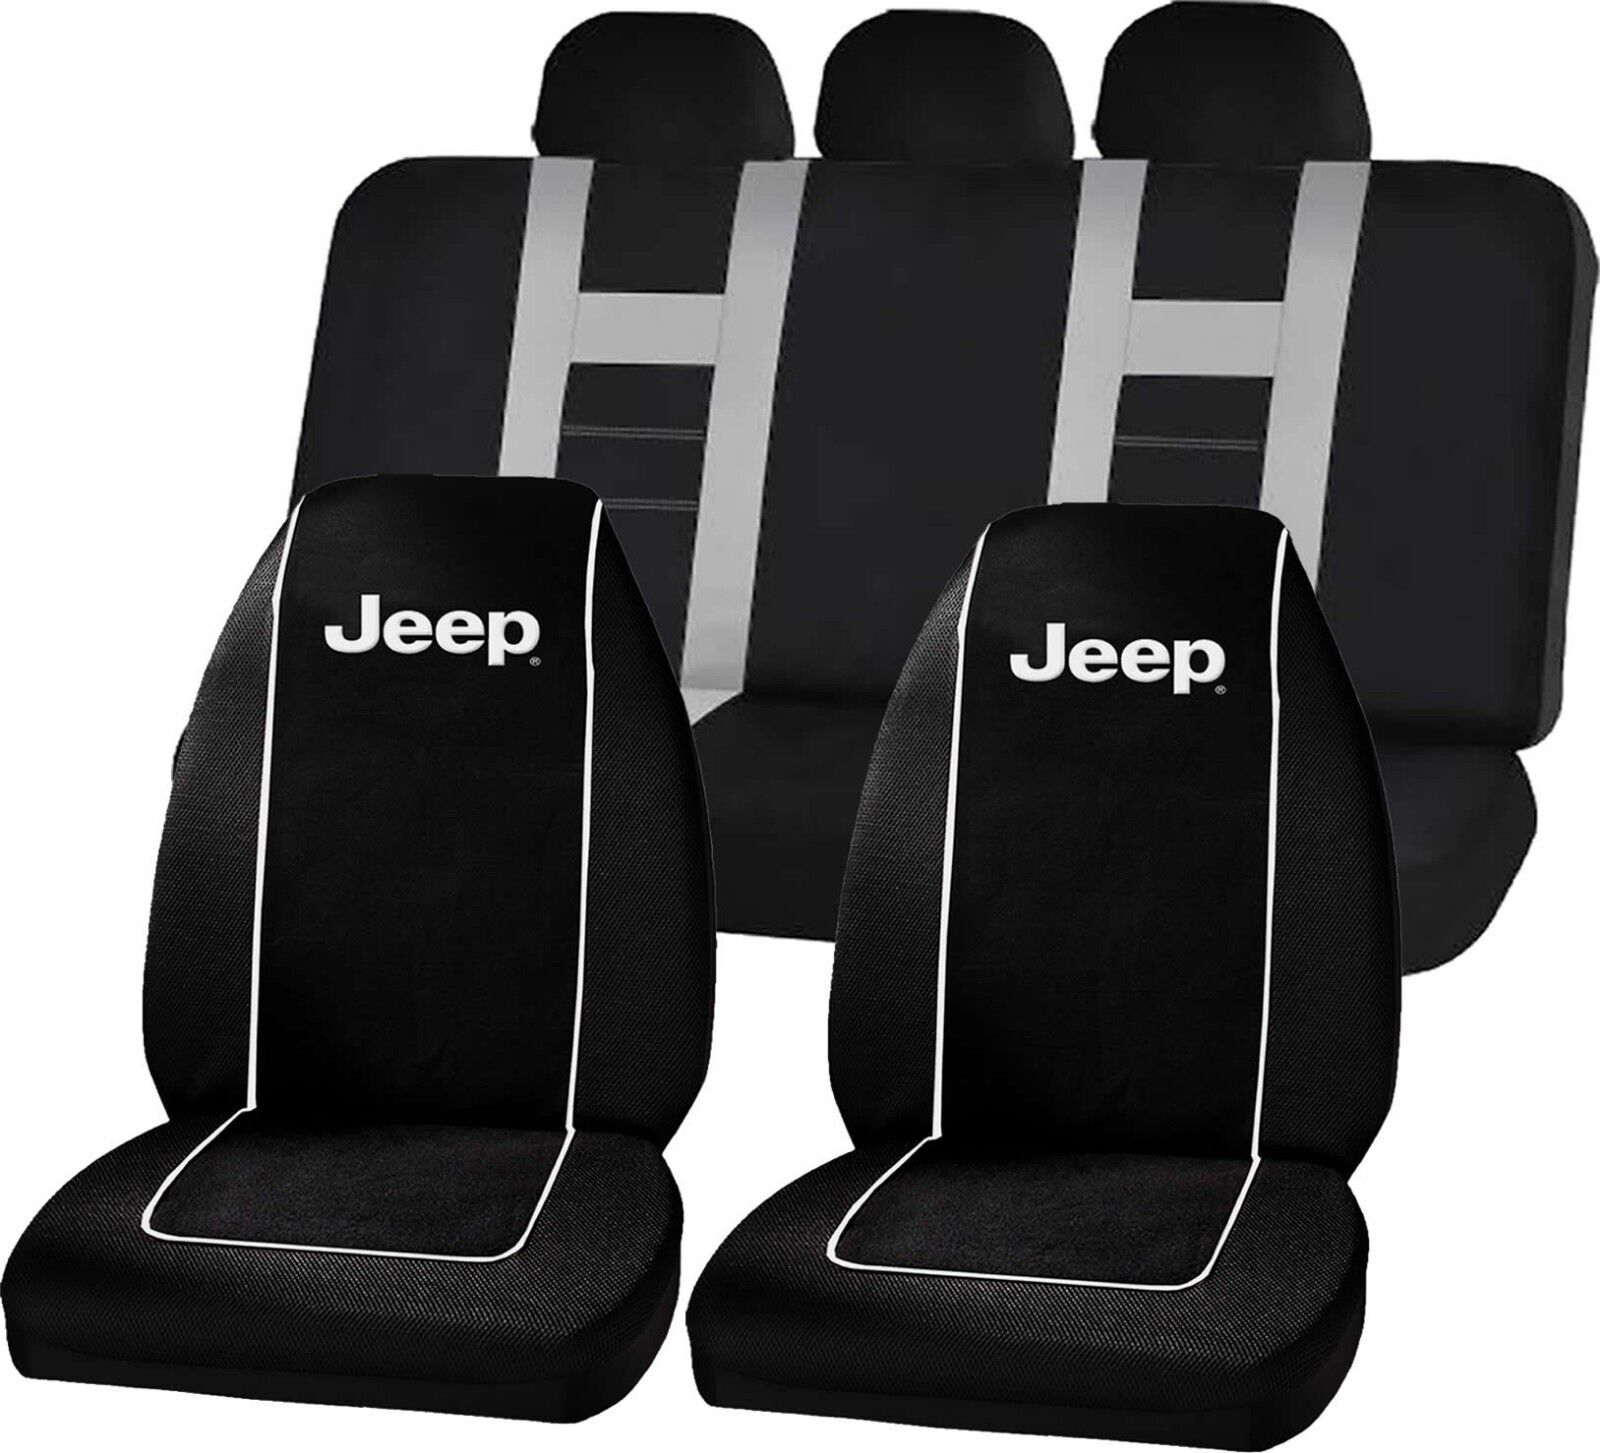 Premium Black High Back Seat Covers Gray Universal Fit Bench Seat Cover for Jeep